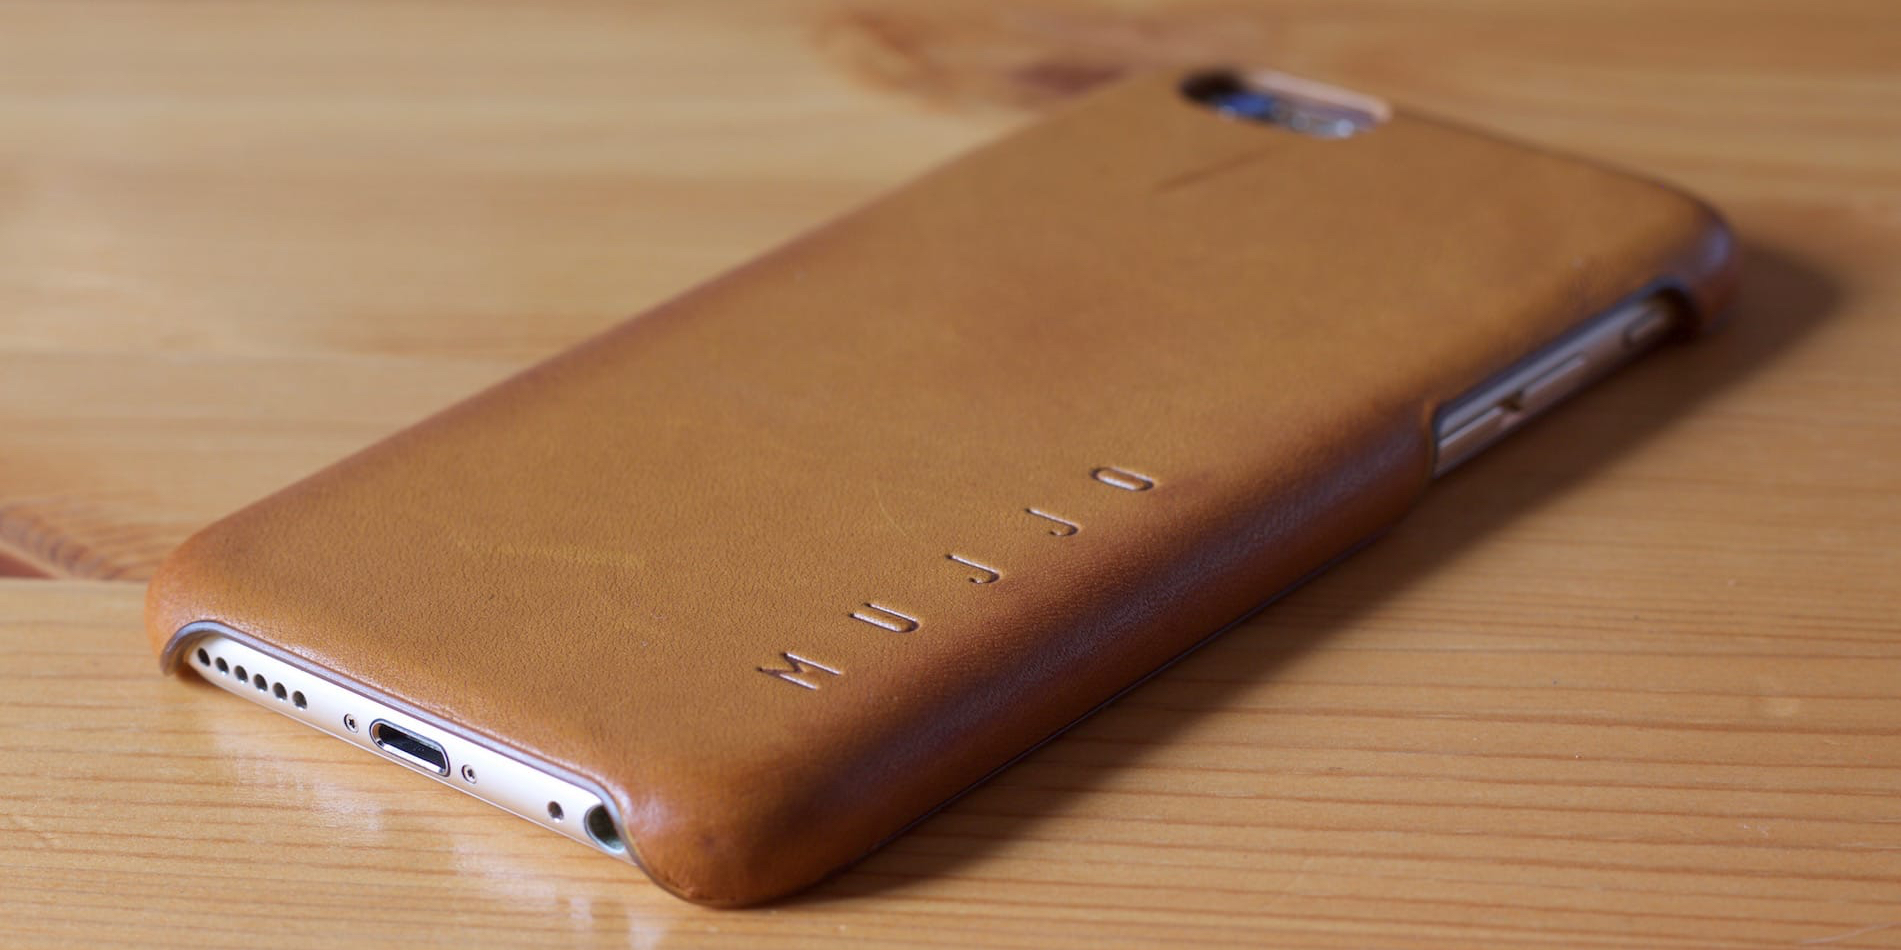 Mujjo Leather Case in Tan for iPhone 6 Featured Image